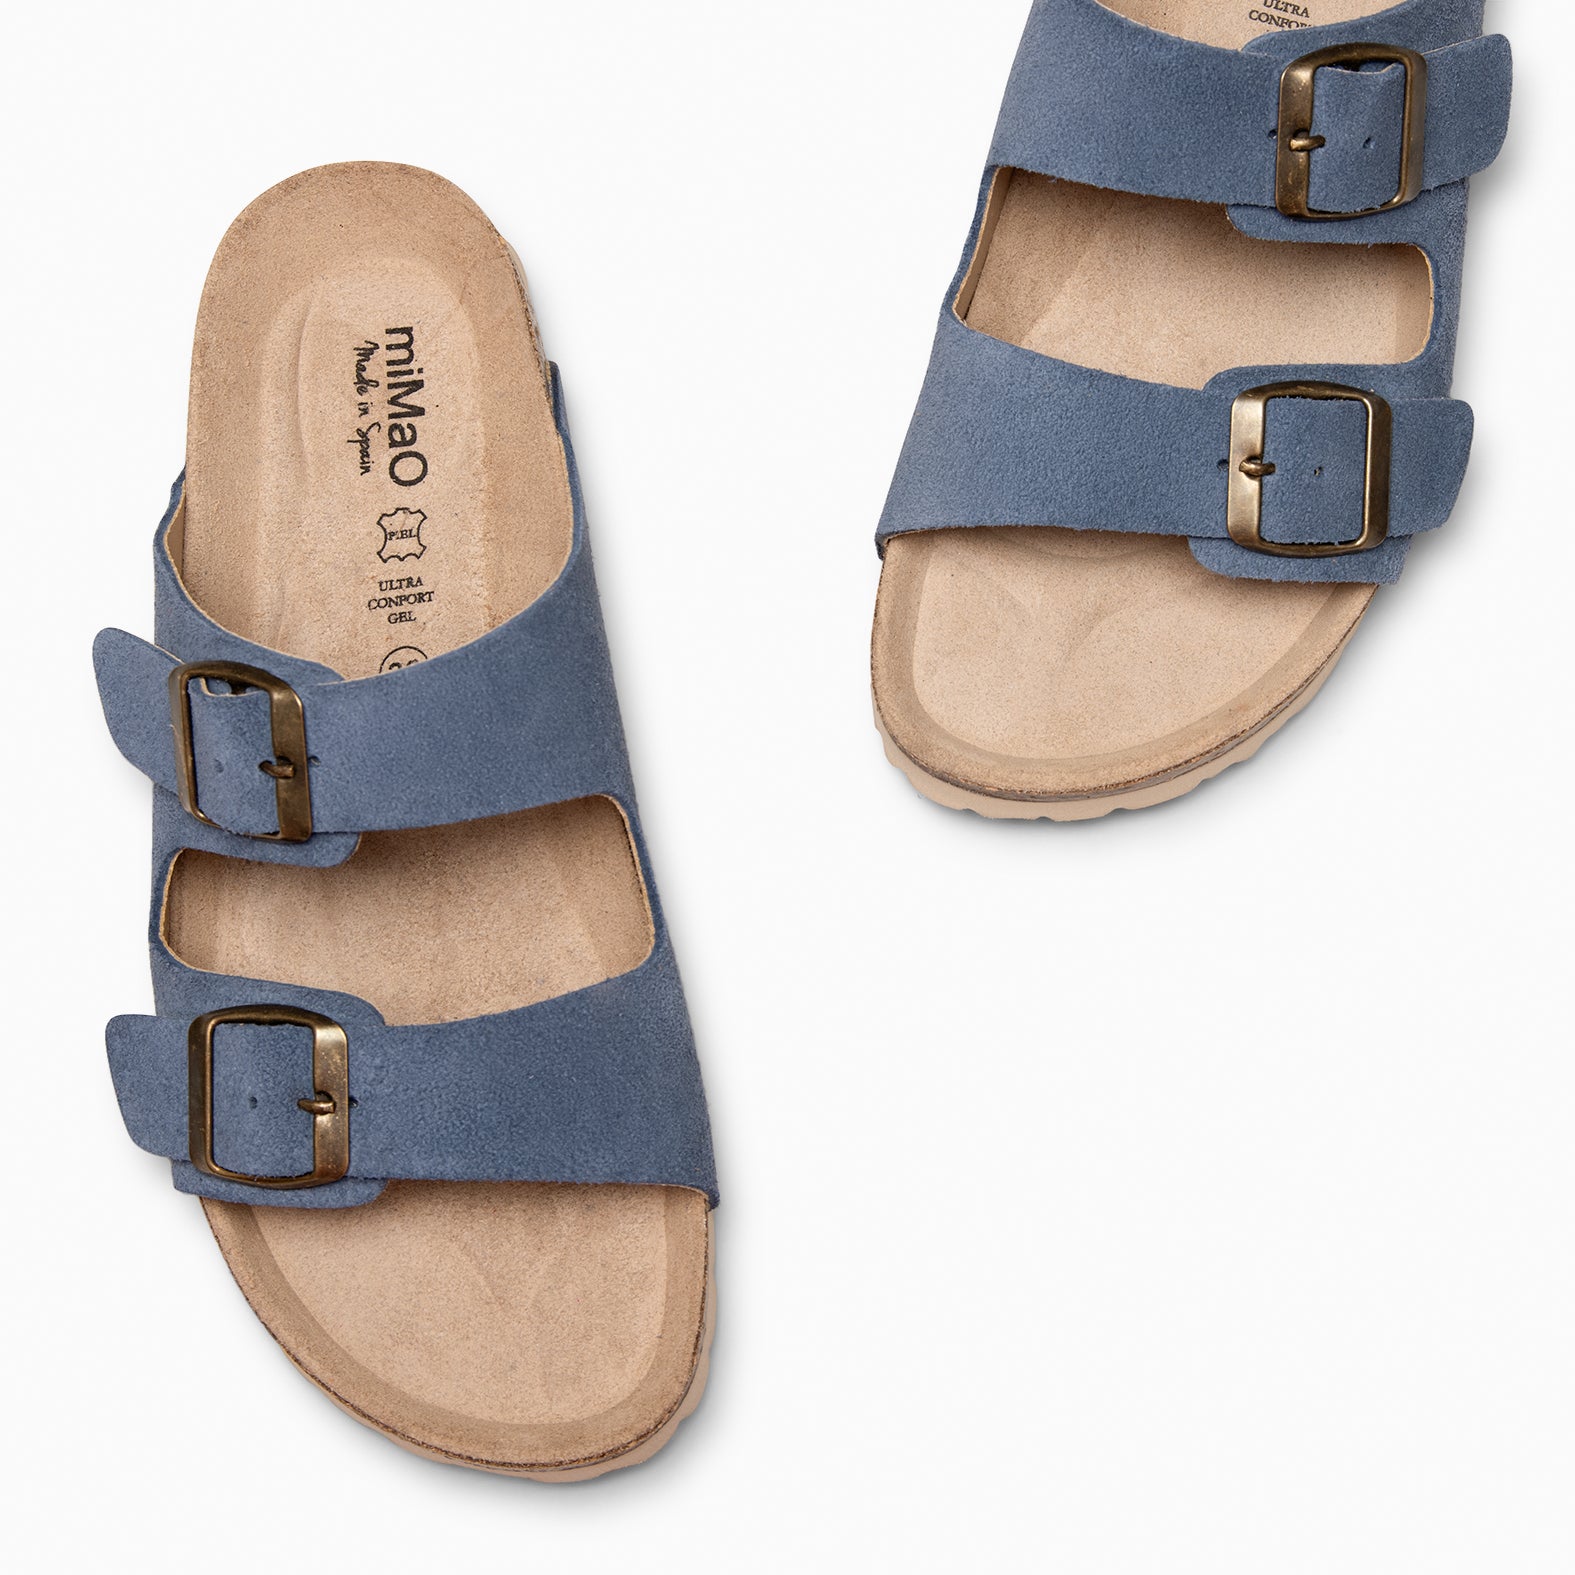 BORA - JEANS Flat sandal with double buckle